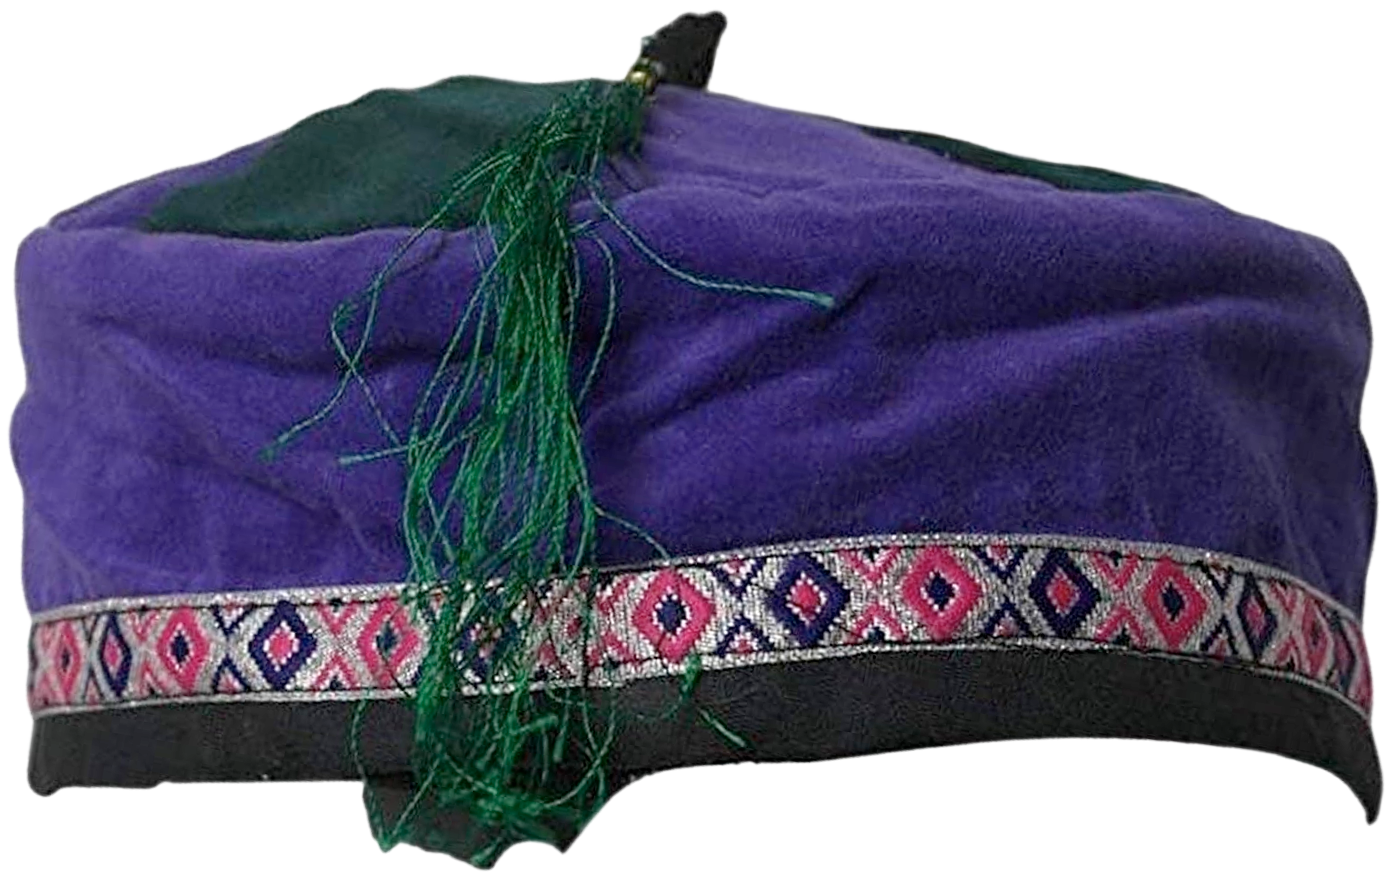 Purple velvet smoking cap with diamond-patterned band and green tassle